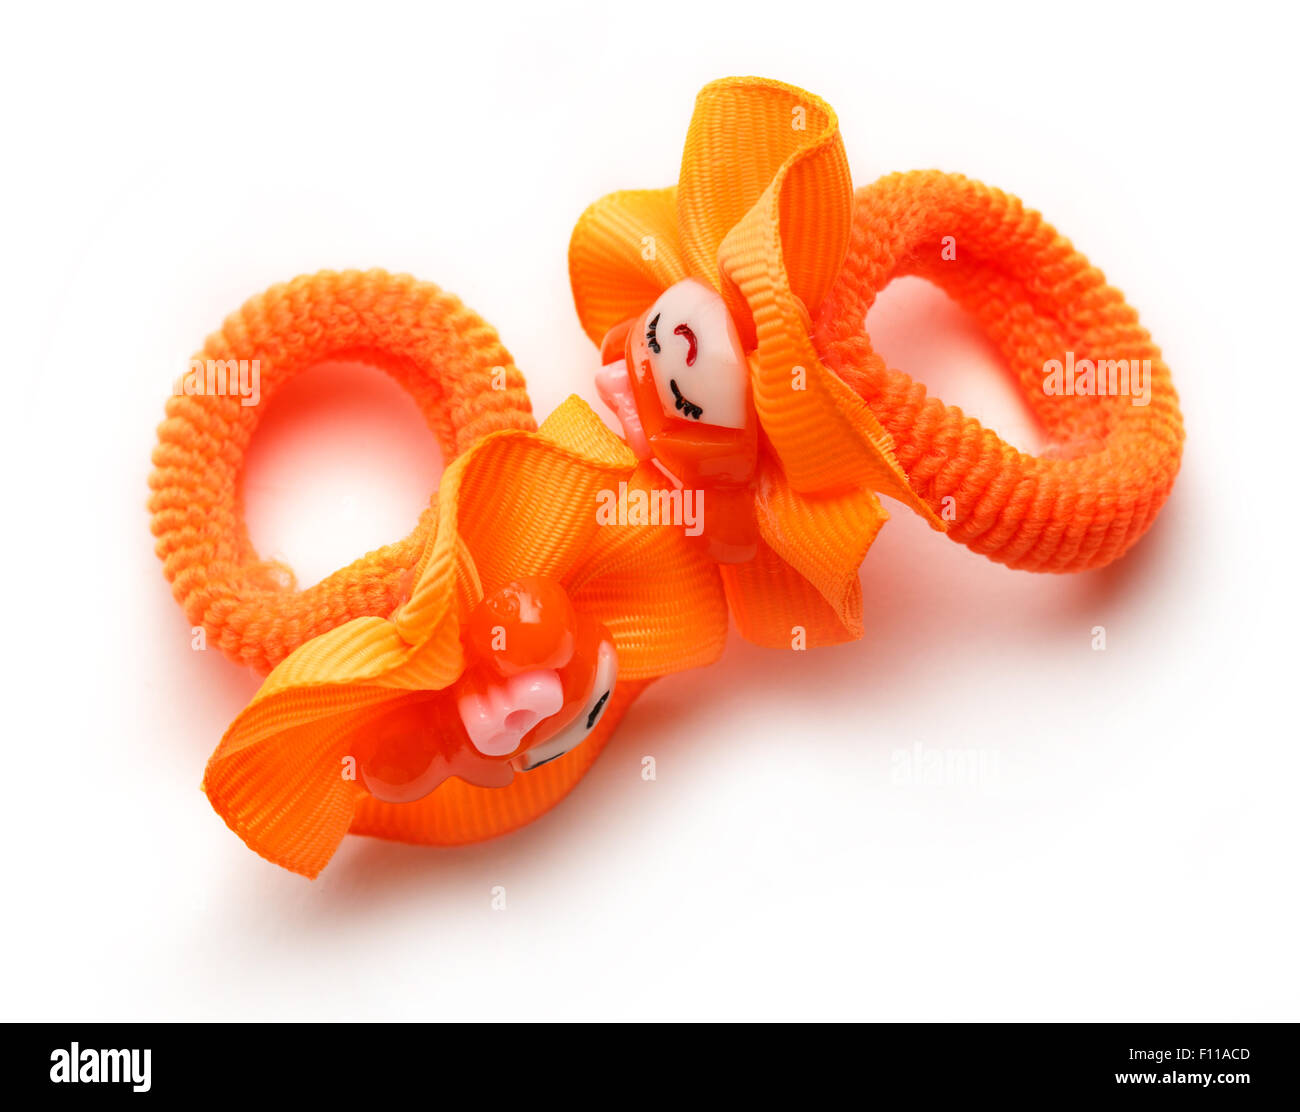 Orange rubber bands for a child on the white background Stock Photo